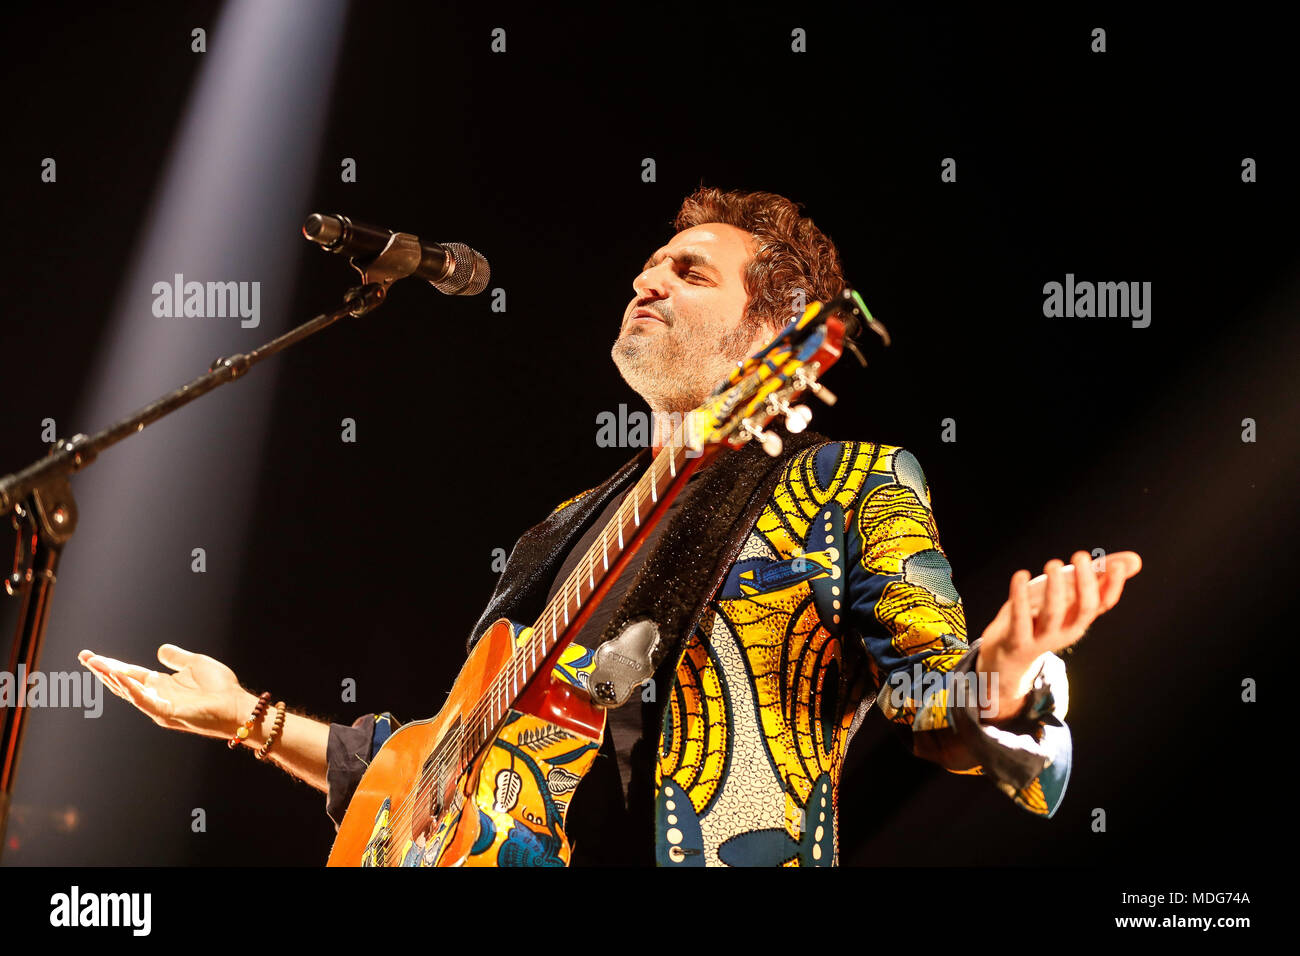 Singer Mathieu Chedid (known as M) in concert at the Zenith concert ...